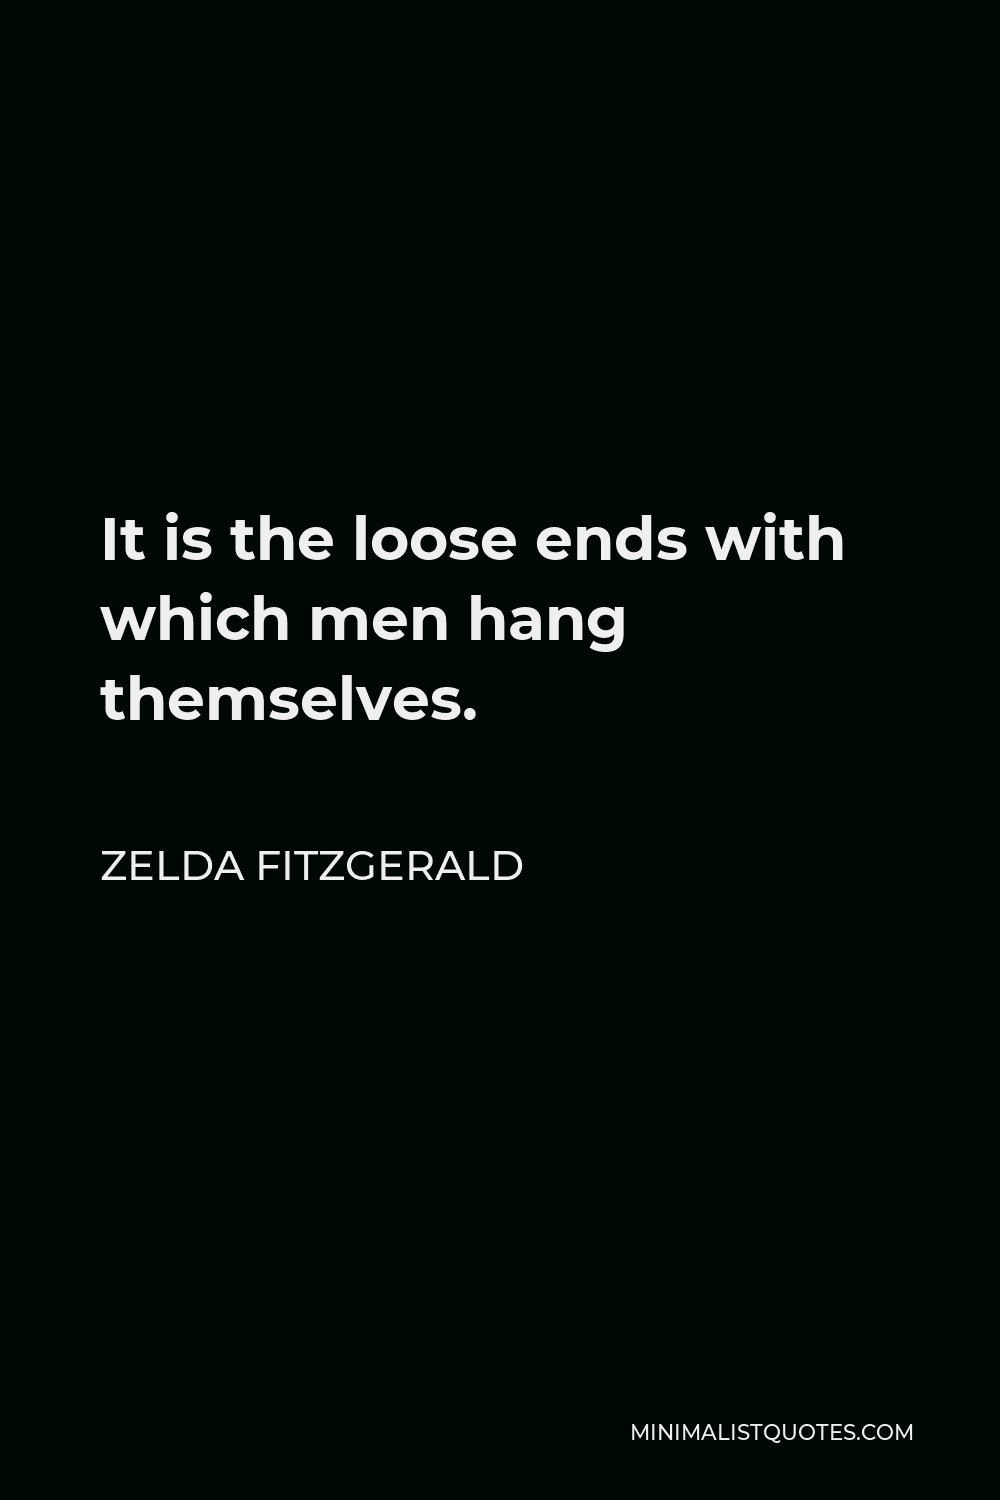 Zelda Fitzgerald Quote - It is the loose ends with which men hang themselves.